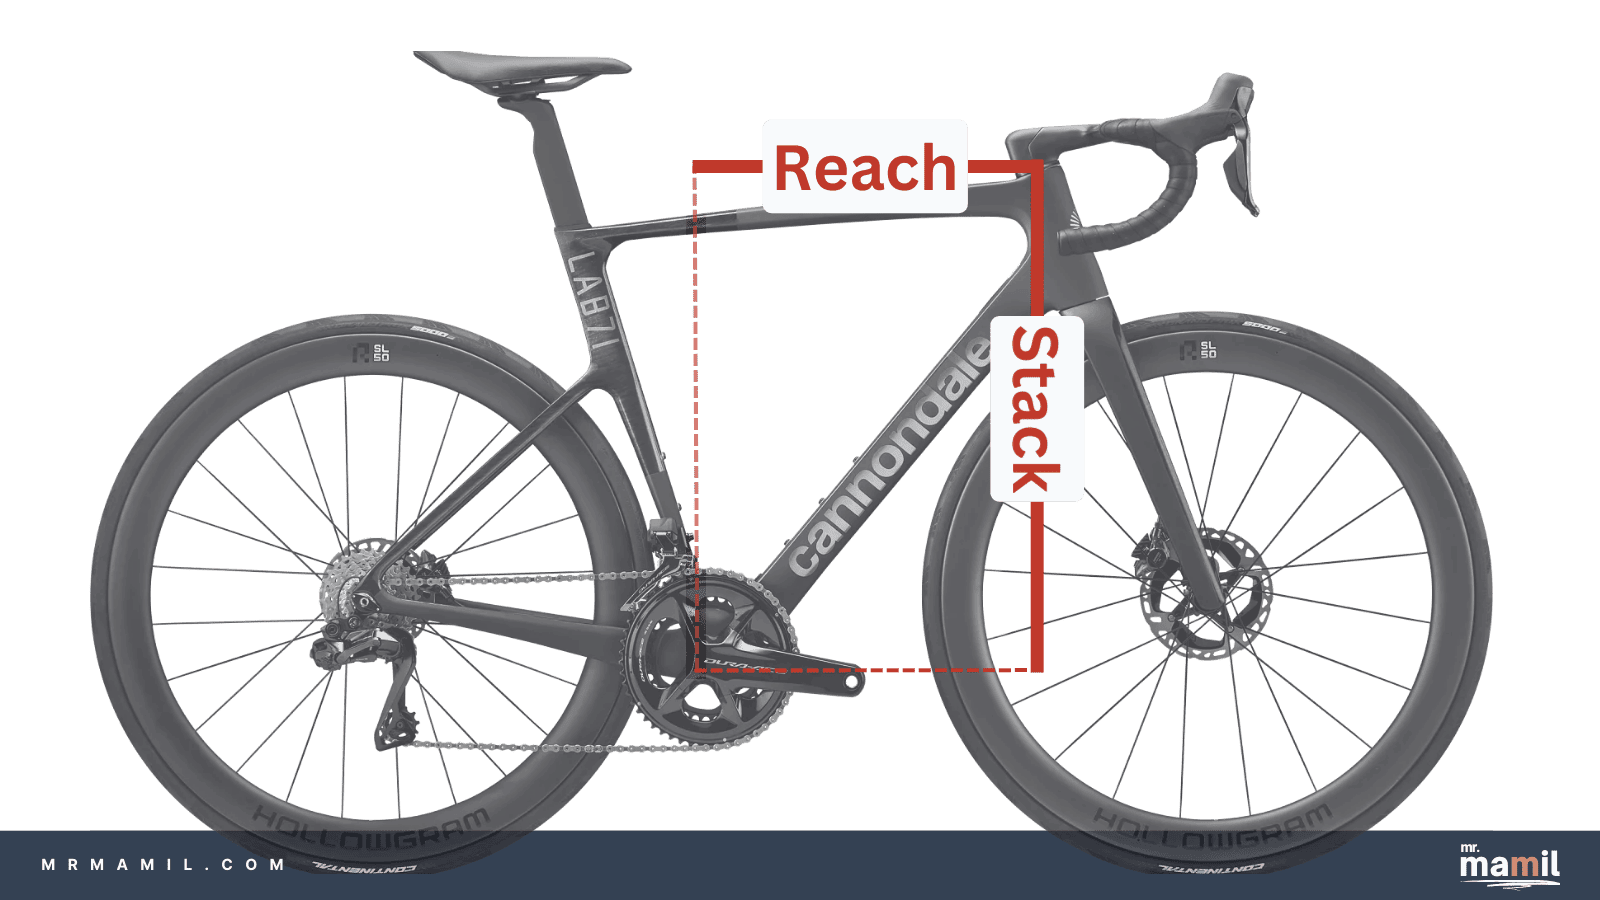 Diagram of a road bicycle illustrating bike geometry. Two main measurements are highlighted: 'Reach', represented by a horizontal dashed line from the center of the bottom bracket to the top center of the handlebar, and 'Stack', shown as a vertical dashed line from the center of the bottom bracket to the same handlebar point.